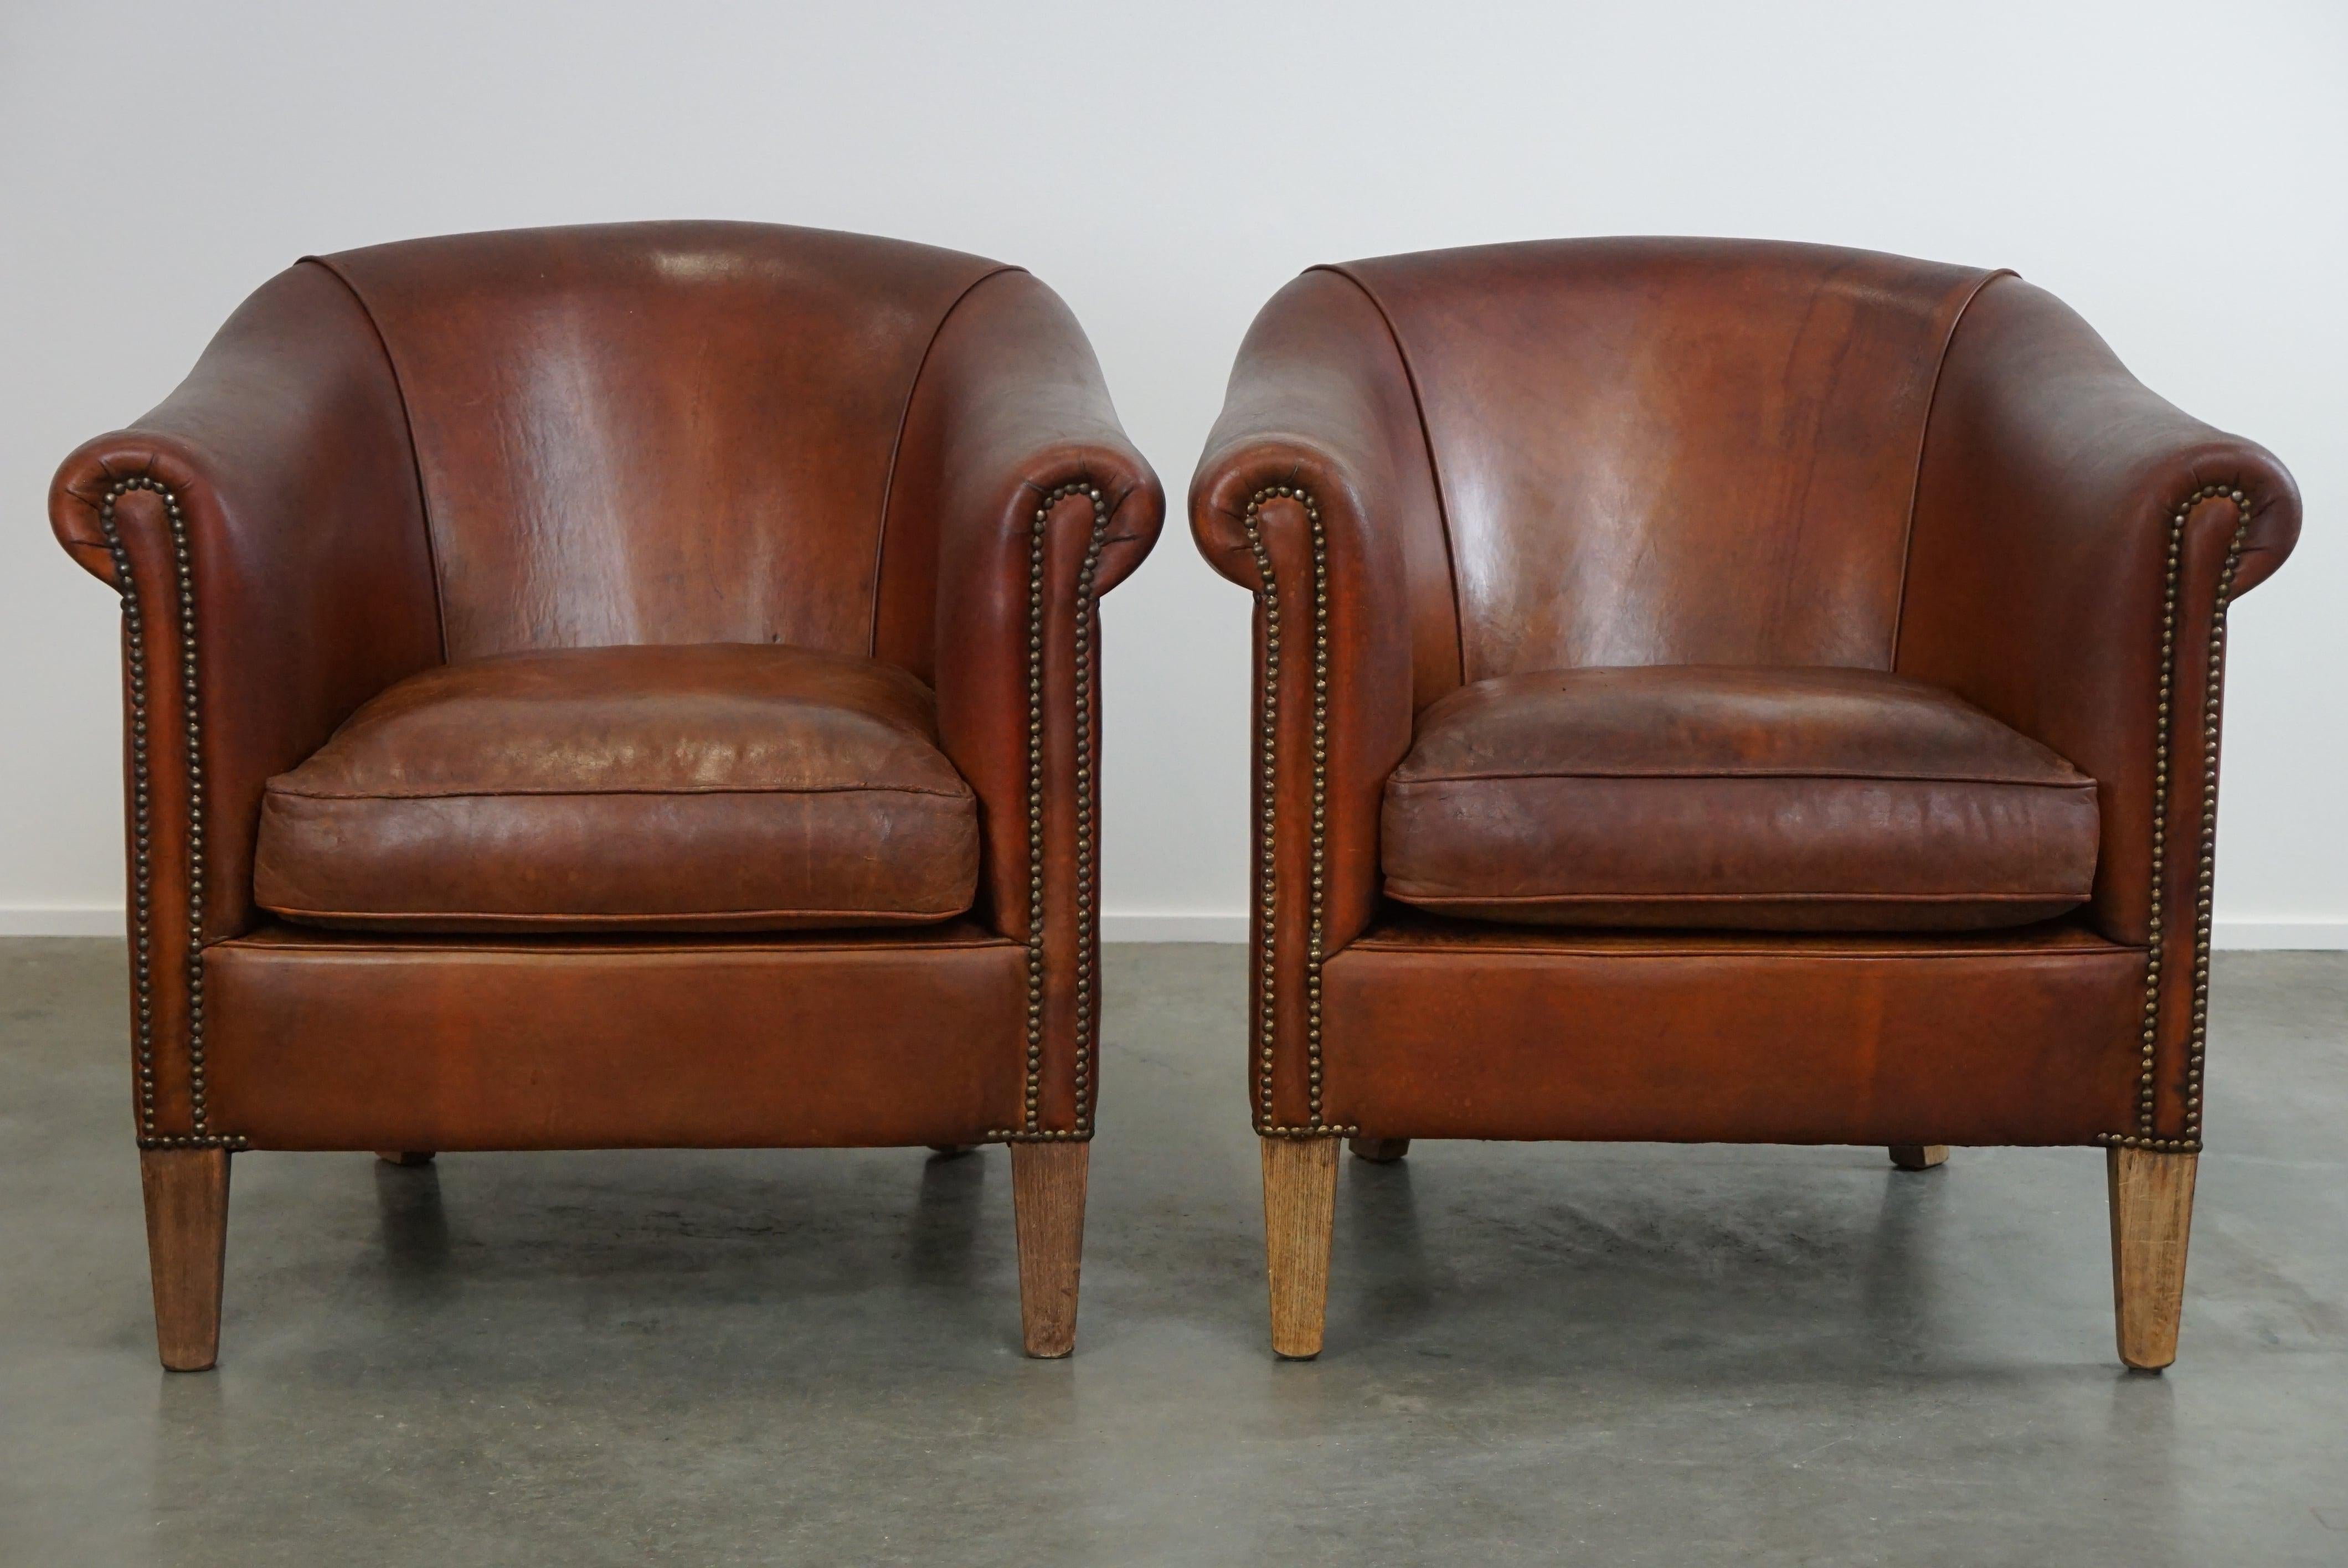 Offered: this lovely set of two vintage sheep leather club armchairs with a rugged character.

With a set of sheep leather club armchairs that have acquired a beautiful patina through use, you're purchasing something that fits into any style and is